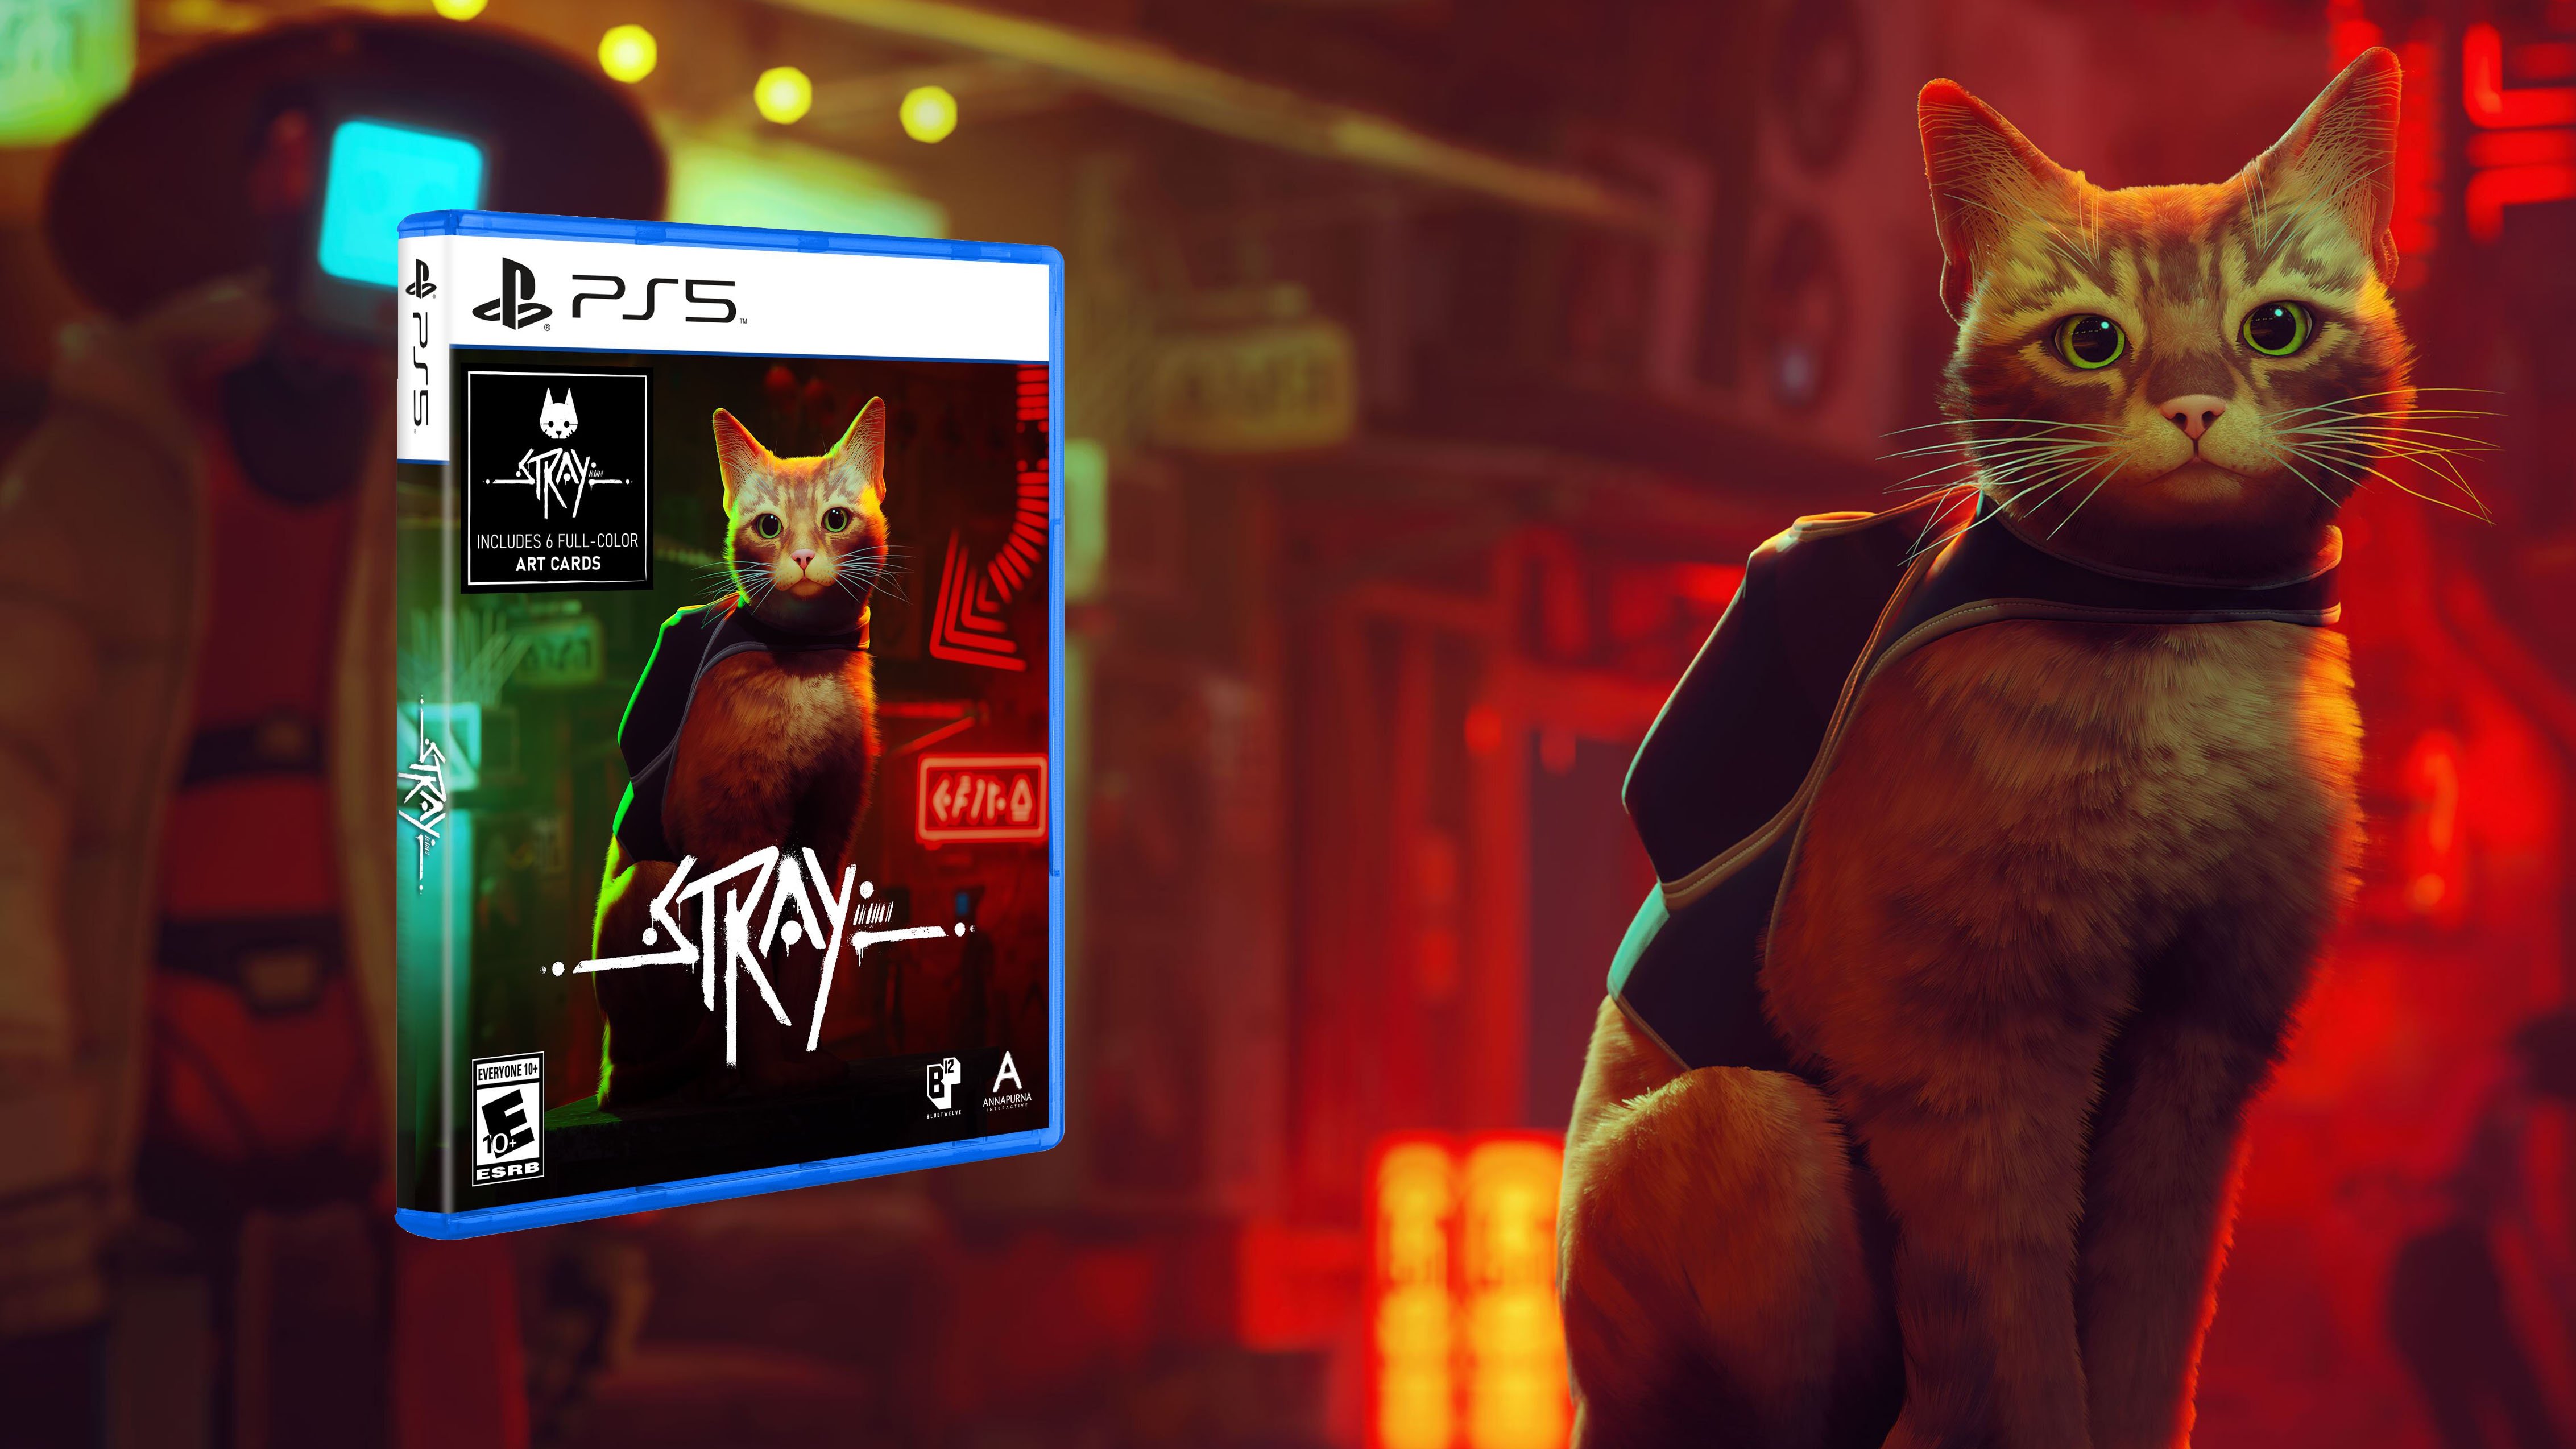 STRAY (Playstation 5) PS5 - CAT GAME! - ***BRAND NEW FACTORY SEALED***